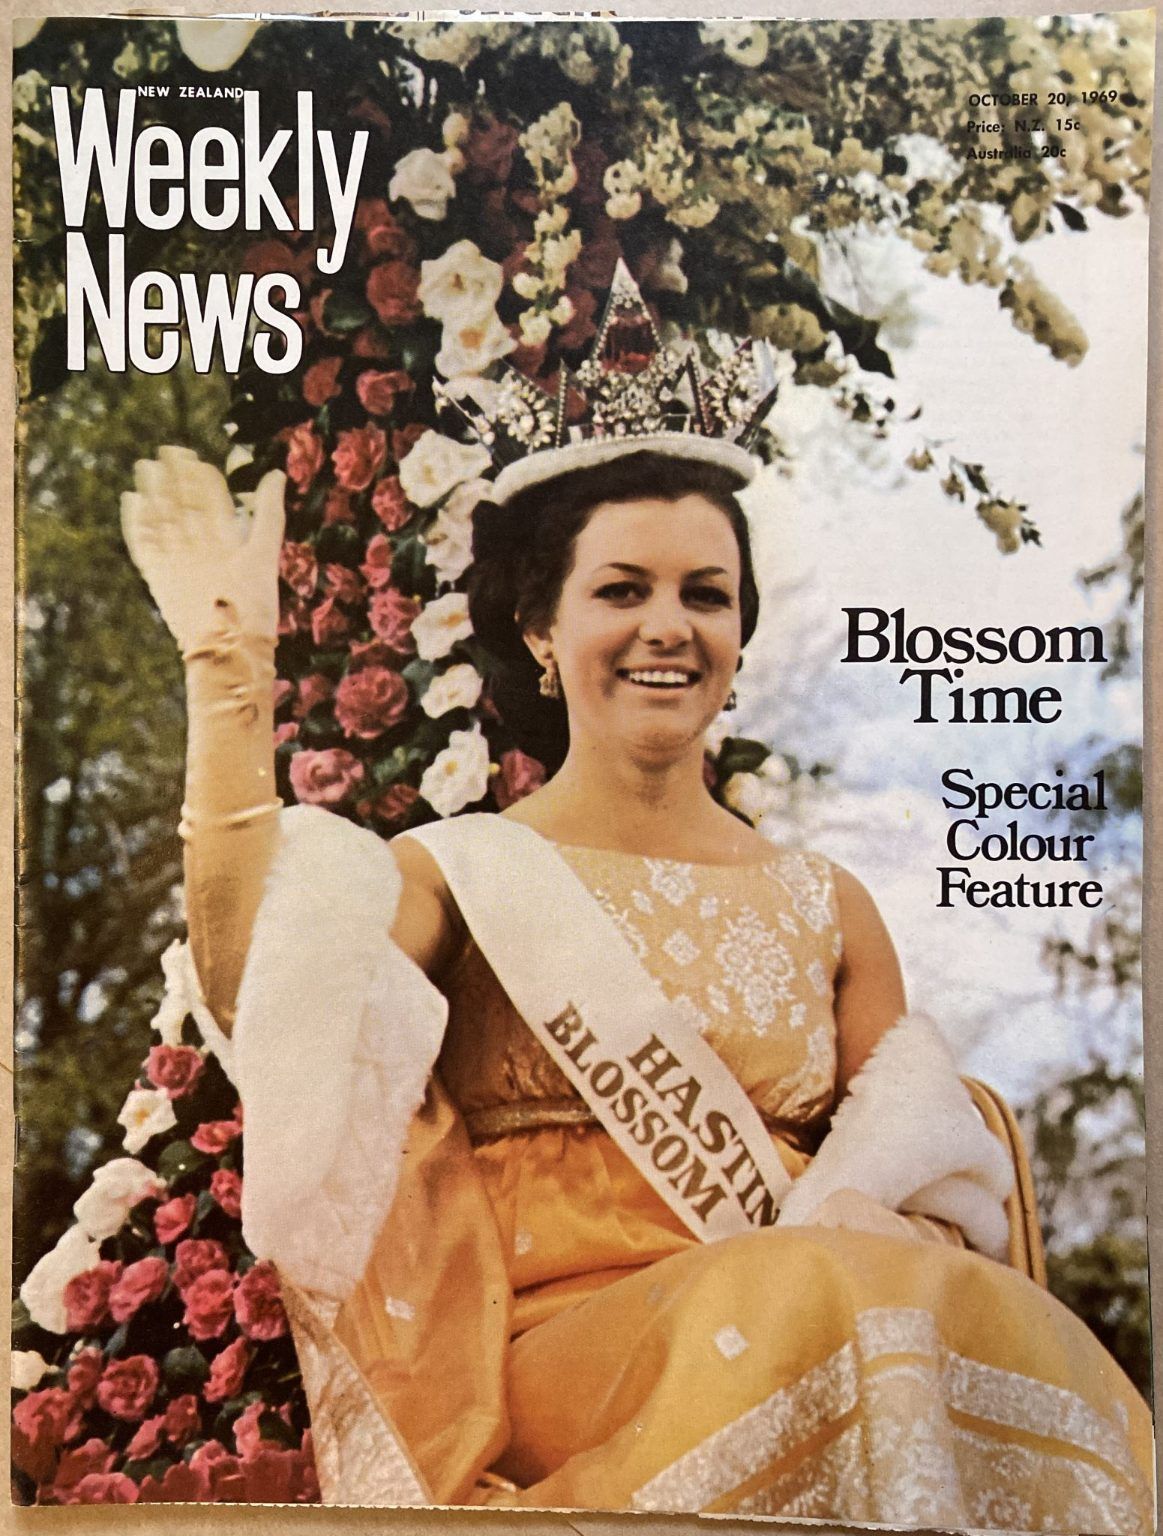 OLD NEWSPAPER: New Zealand Weekly News, No. 5525, 20 October 1969